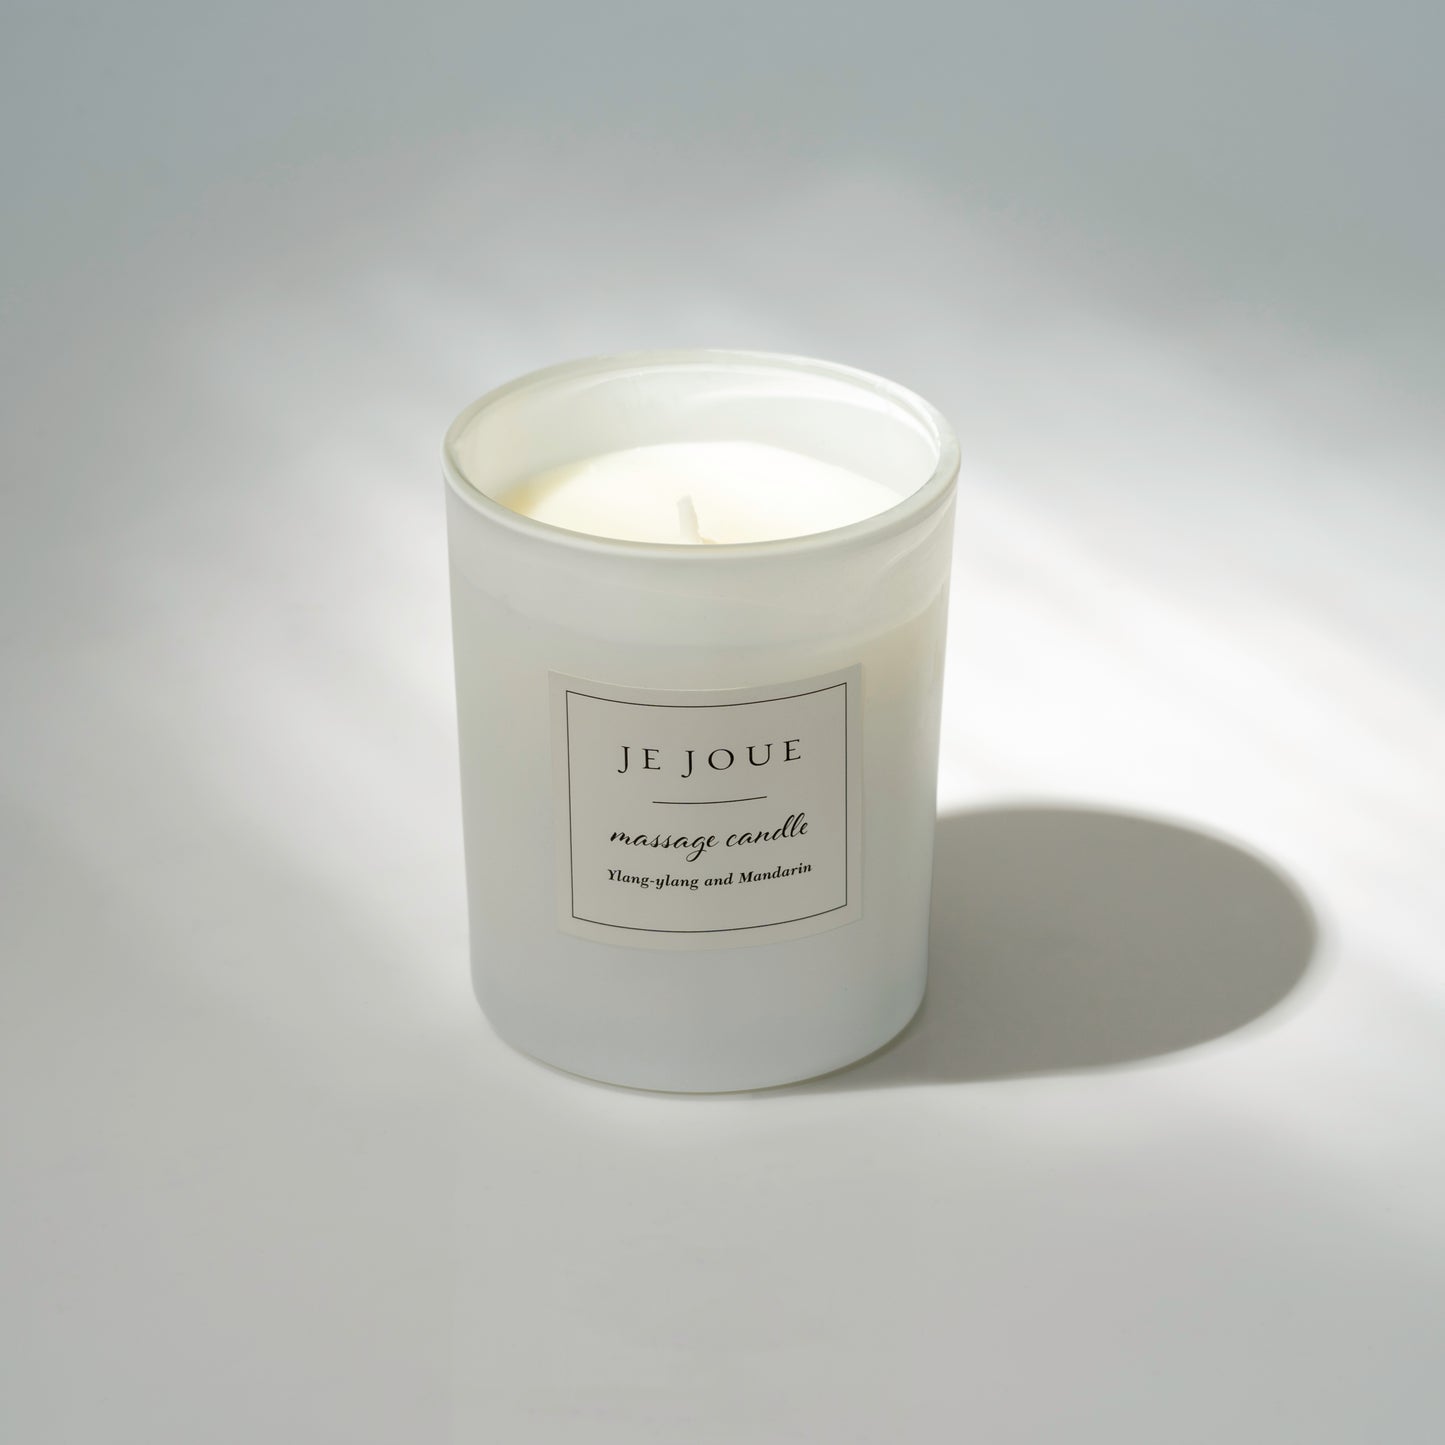 Cool and Relaxed Massage Candle – Aromatic Joy